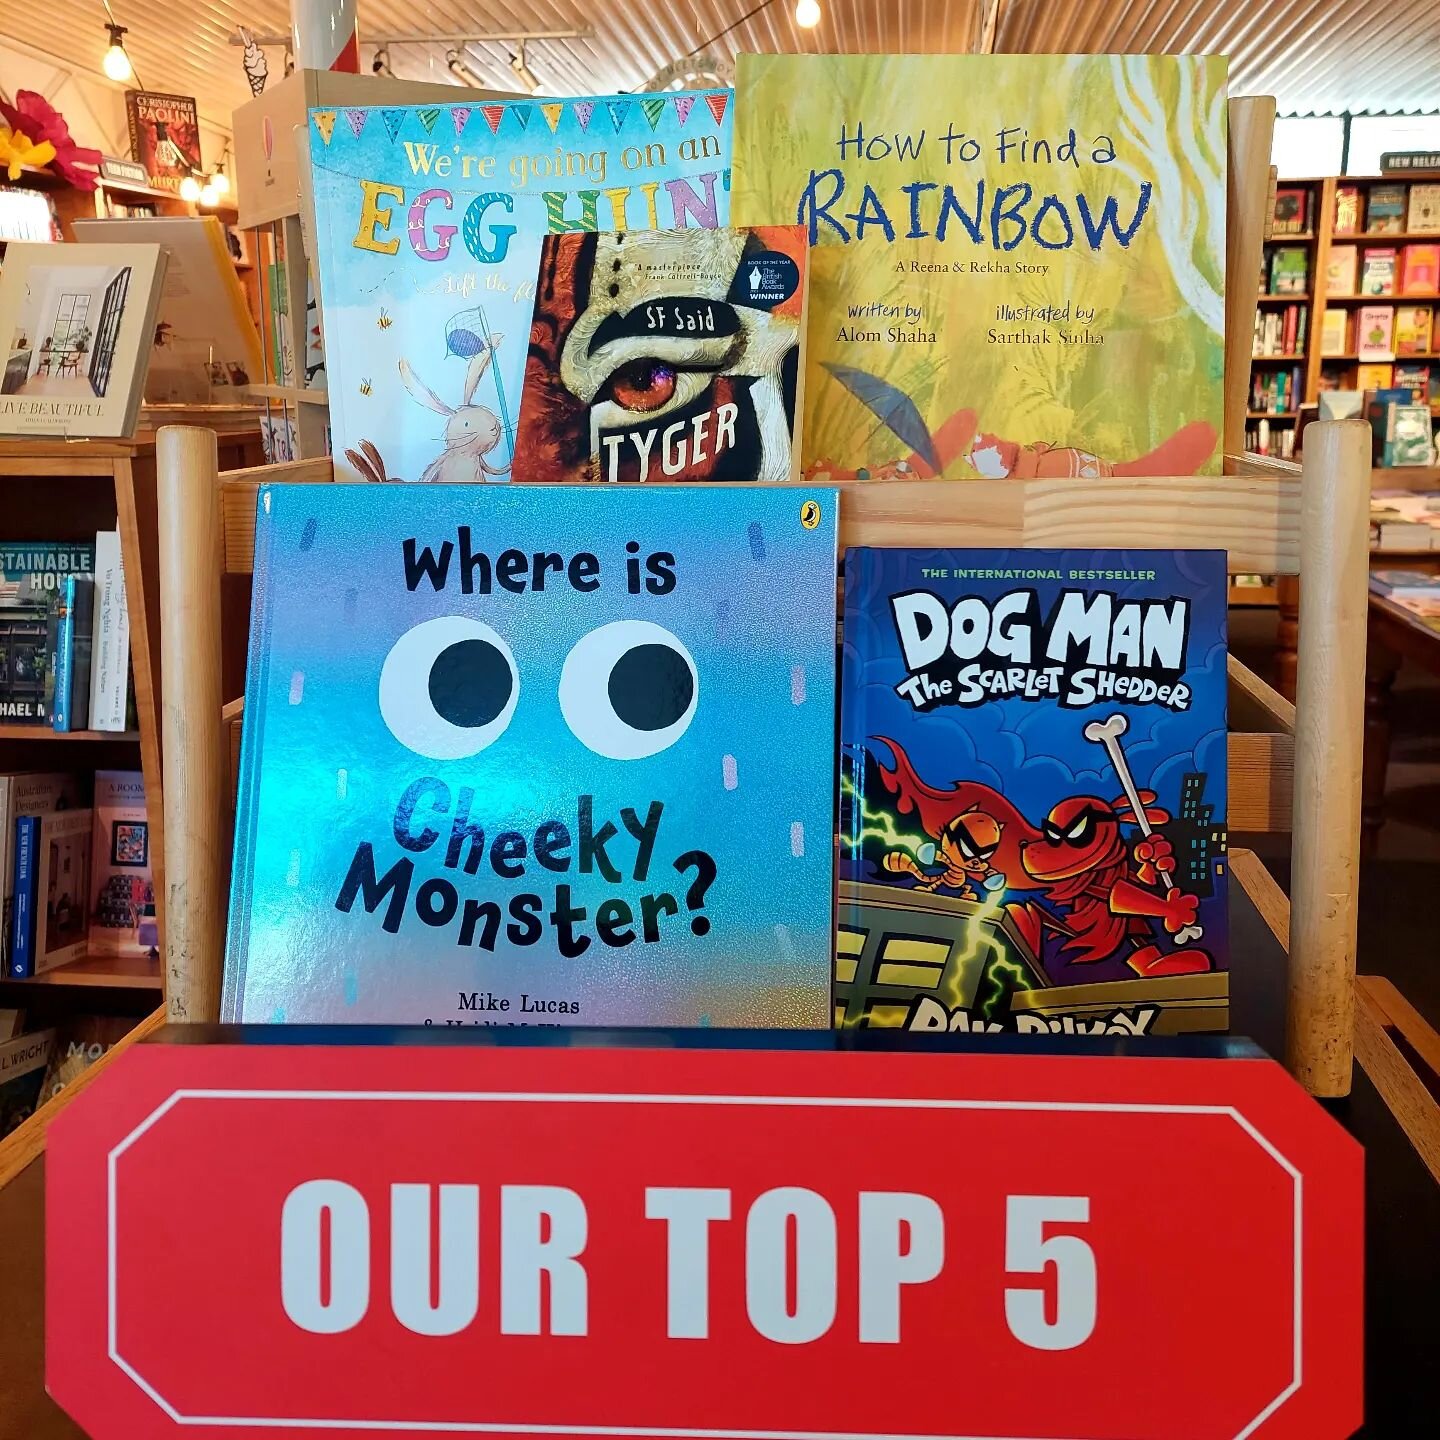 🌈 Our Weekly Top 🖐 🌈 

Easter egg and rainbow hunts 🐣 hide and seek with a cheeky monster 👾 and some thrilling adventure books for various ages featuring animal companions 🐕 🐯 

Your top five is full of excitement, colour and heart this week! 